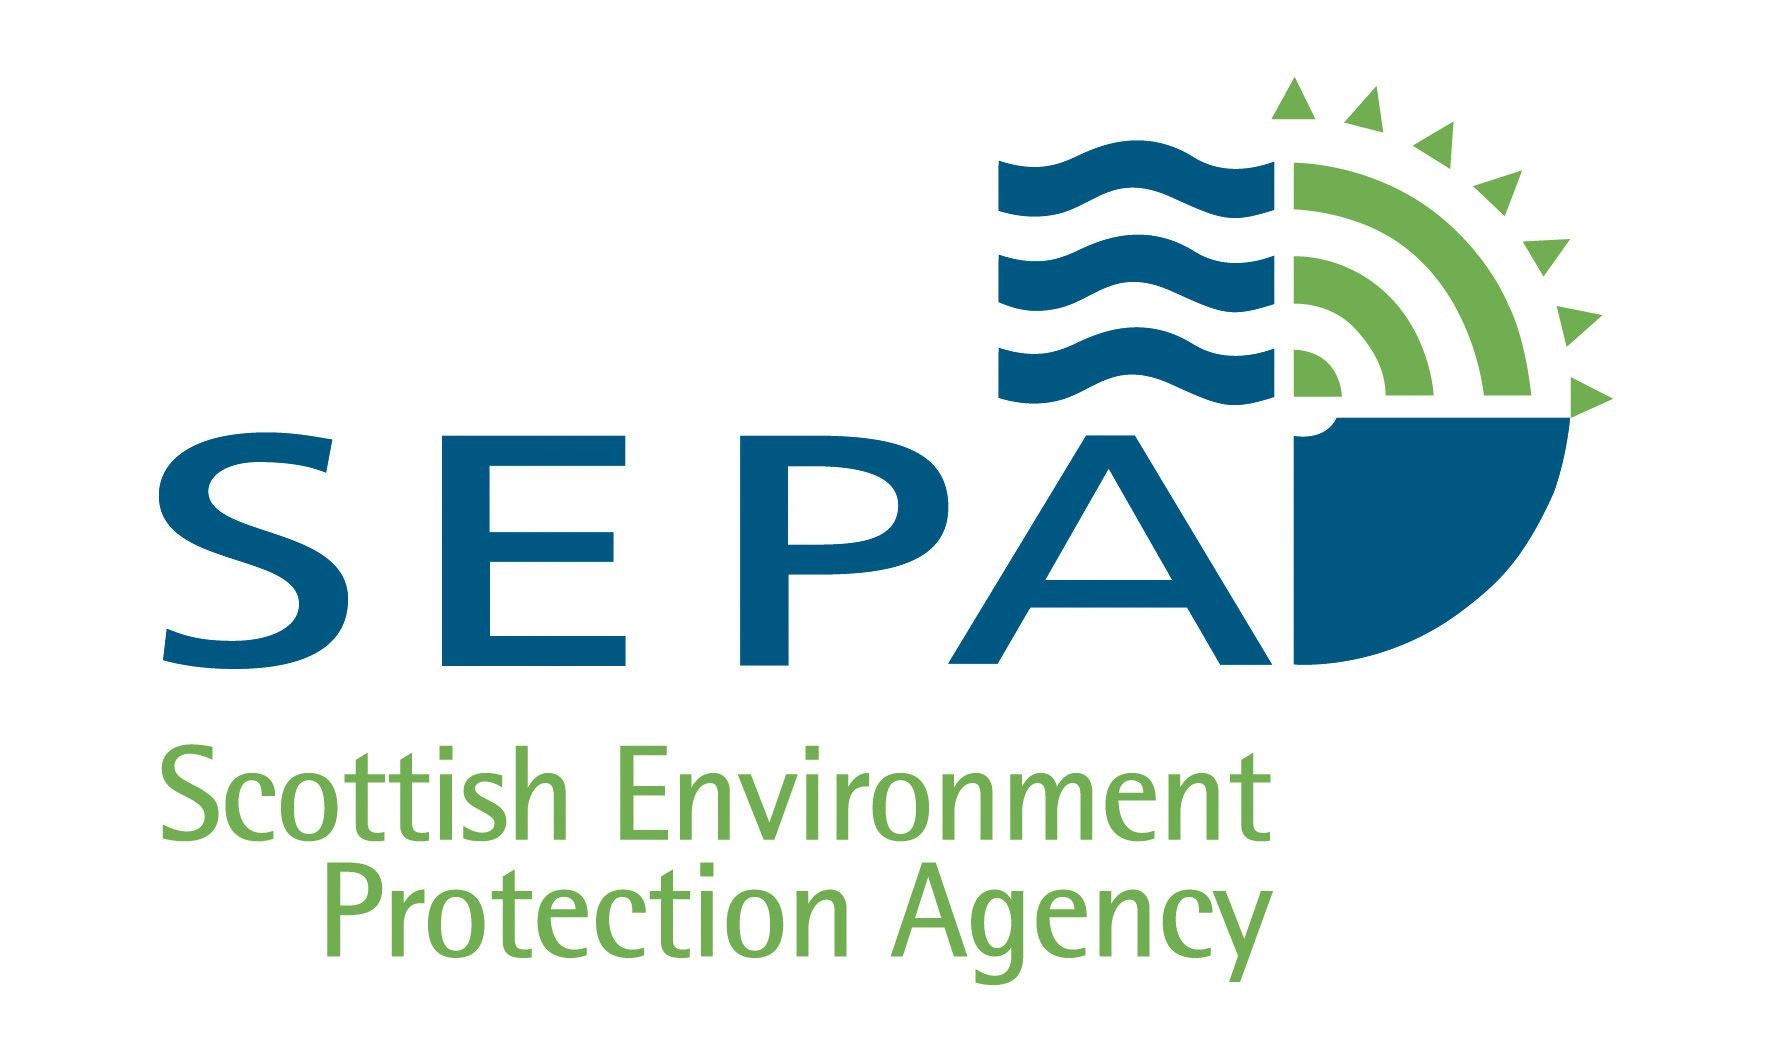 SEPA has said the pollution incident was short-lived and will have no lasting effect.